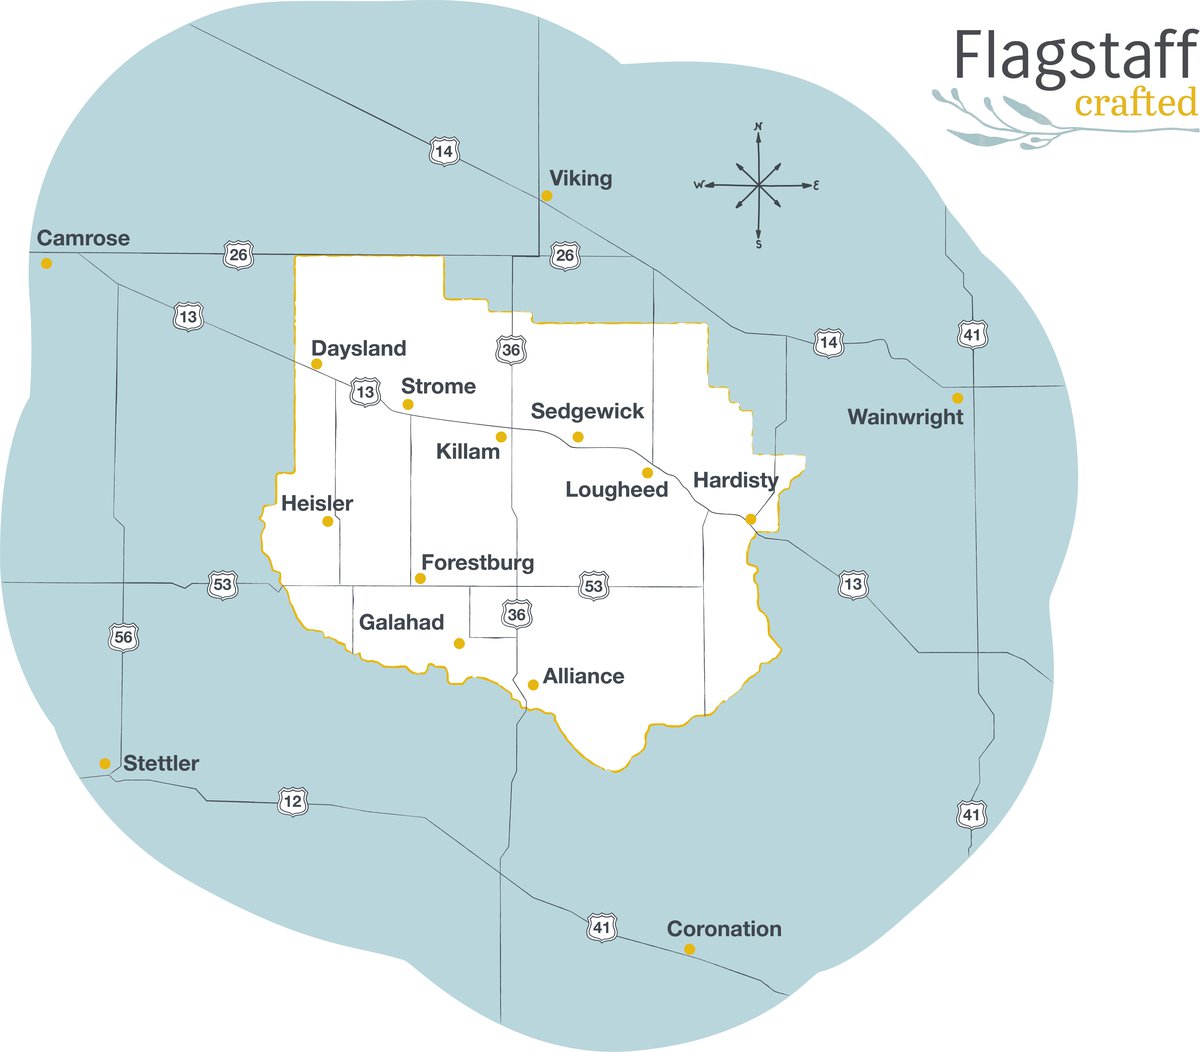 Final Flagstaff Crafted Map New Font 002.width 1200 